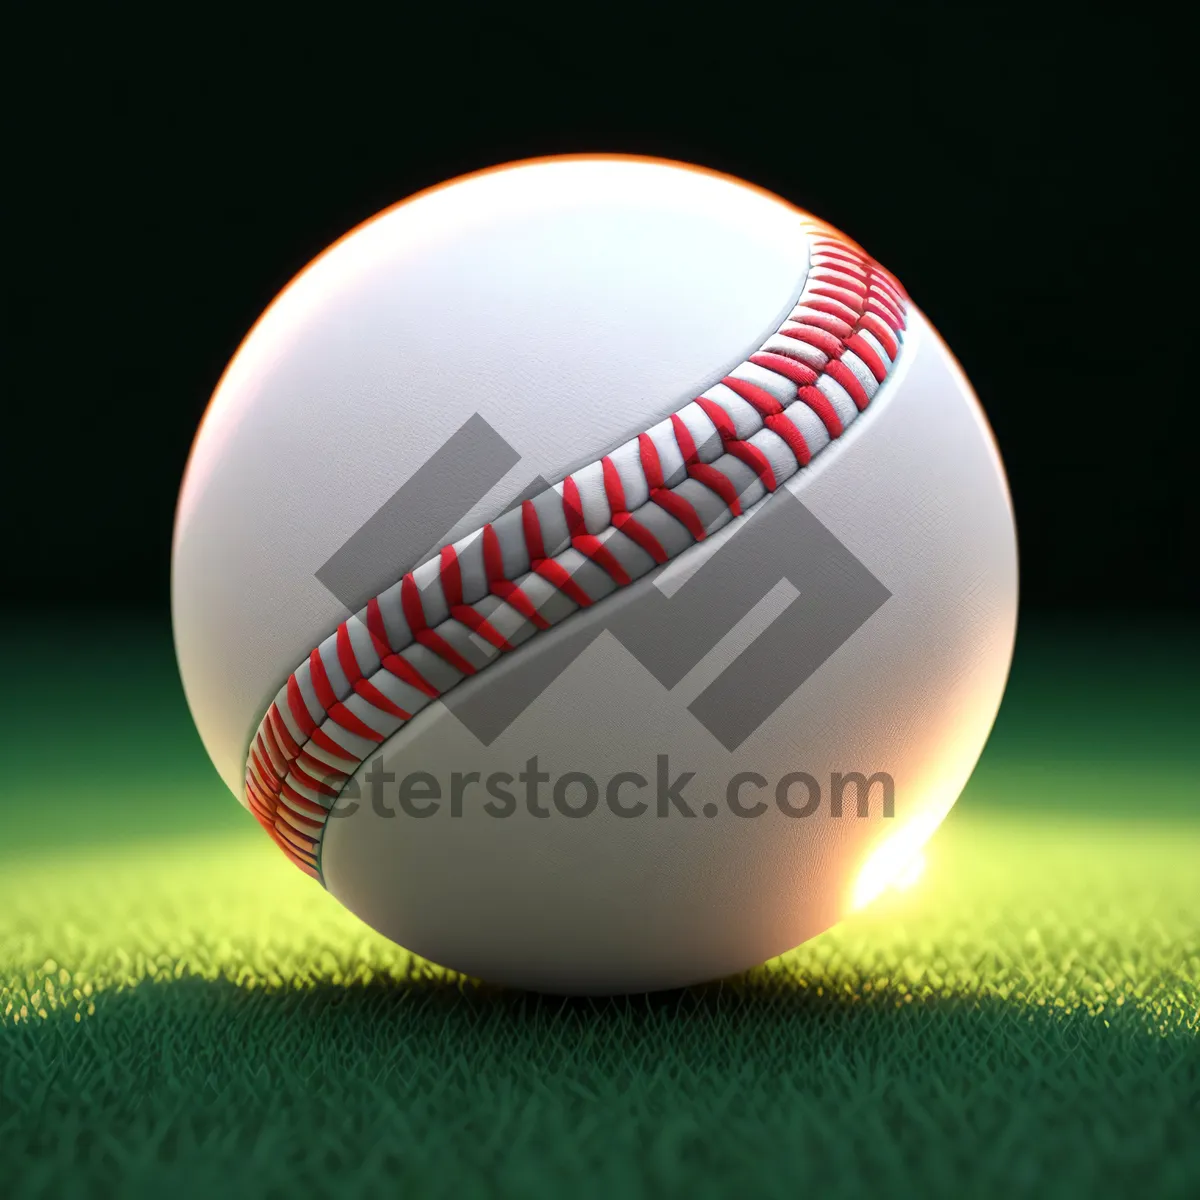 Picture of Baseball Stitched Sphere: Symbol of Competitive Sports